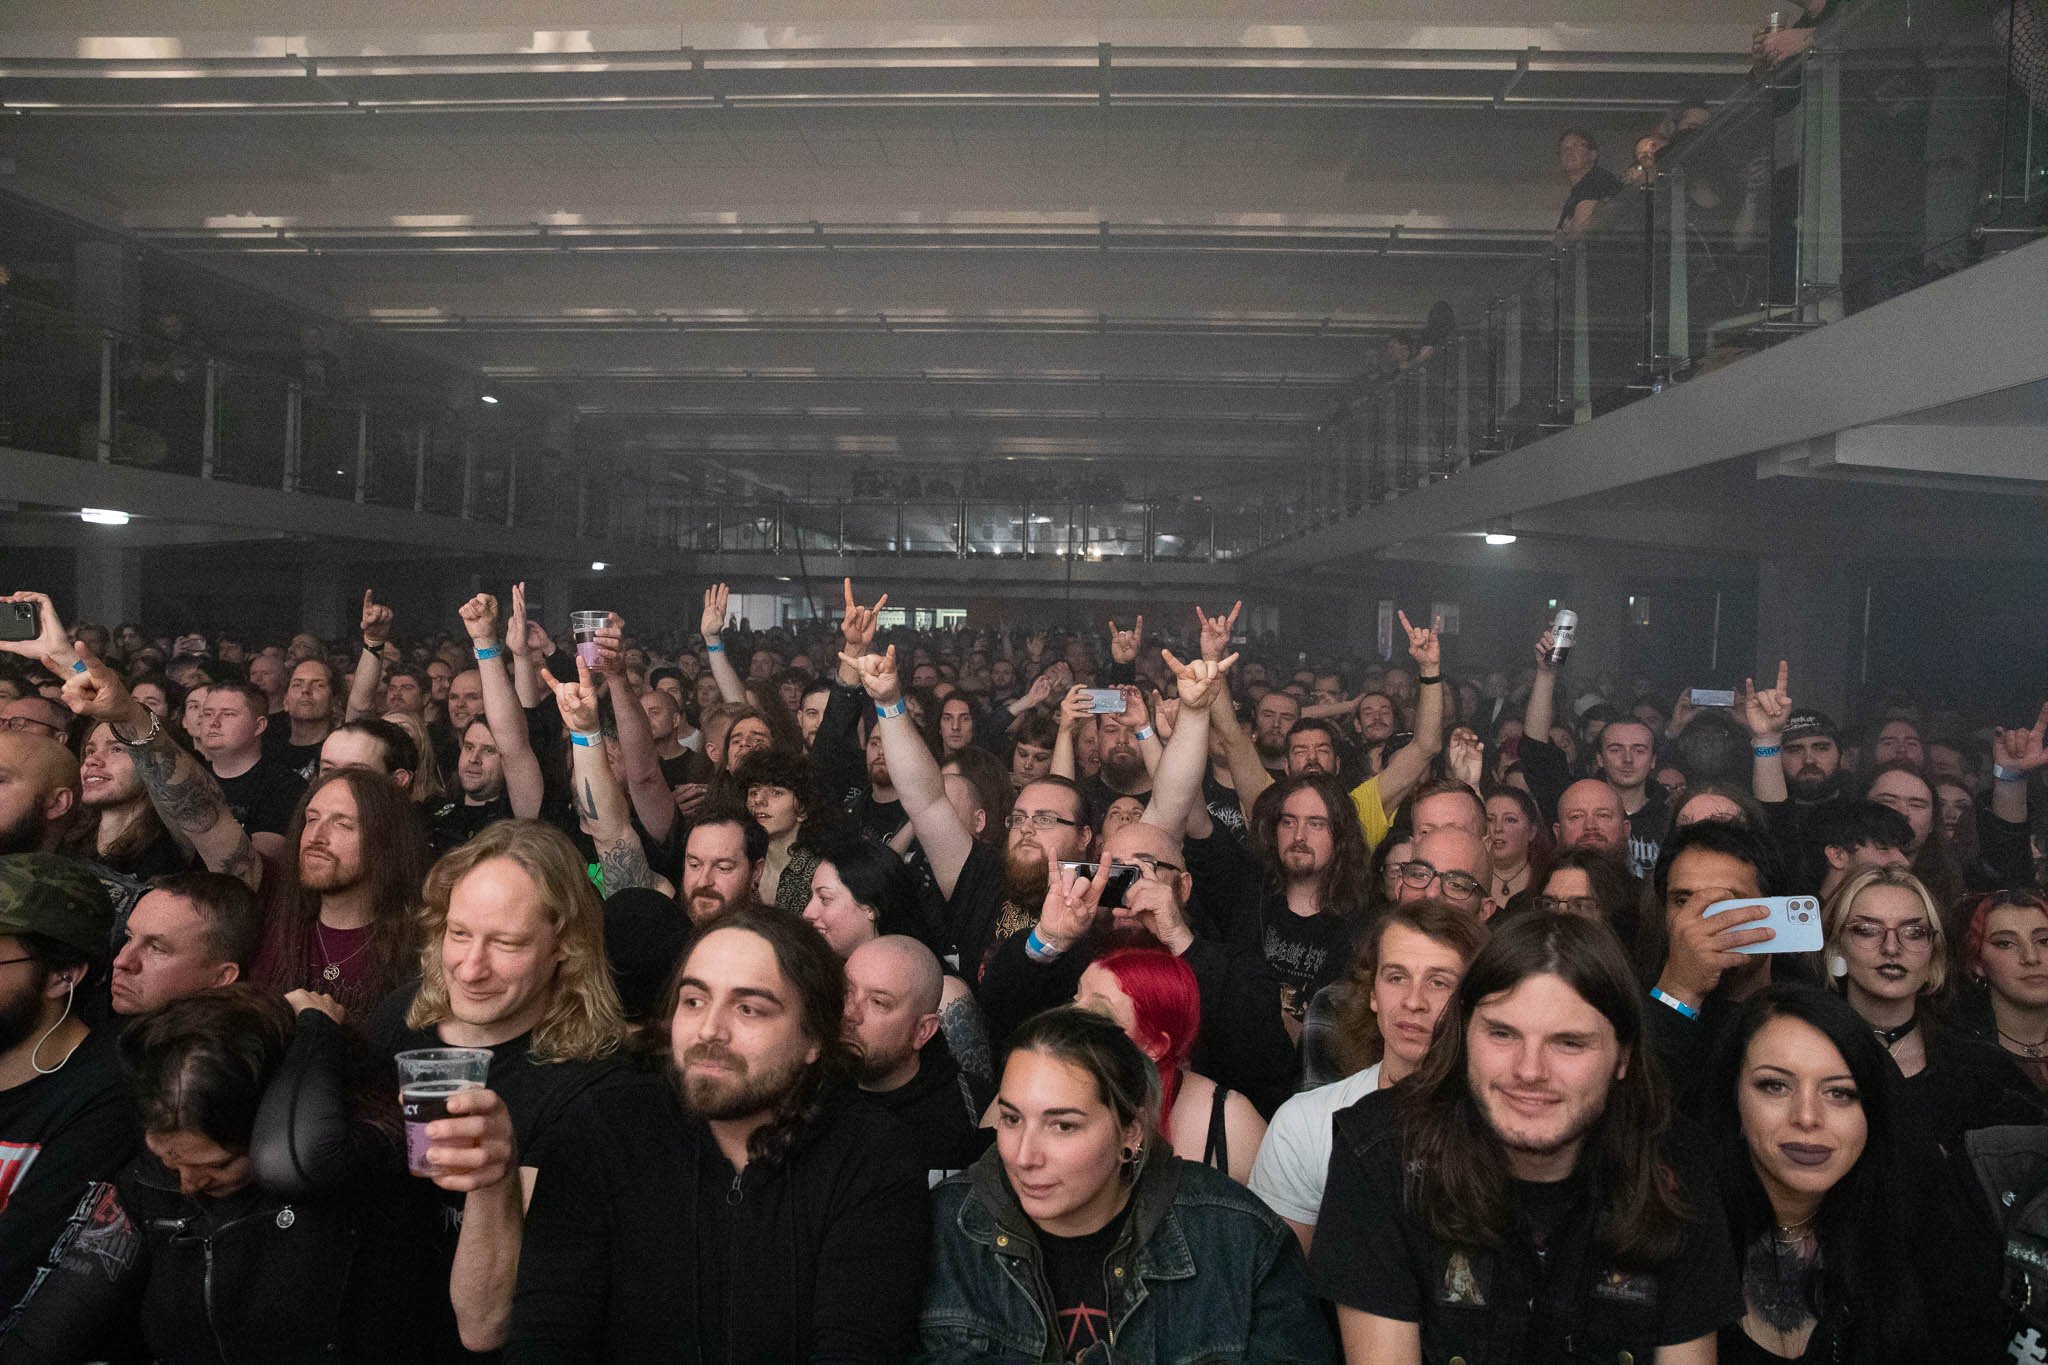 Carcass at the Damnation Festival in Leeds on November 6th 2021 